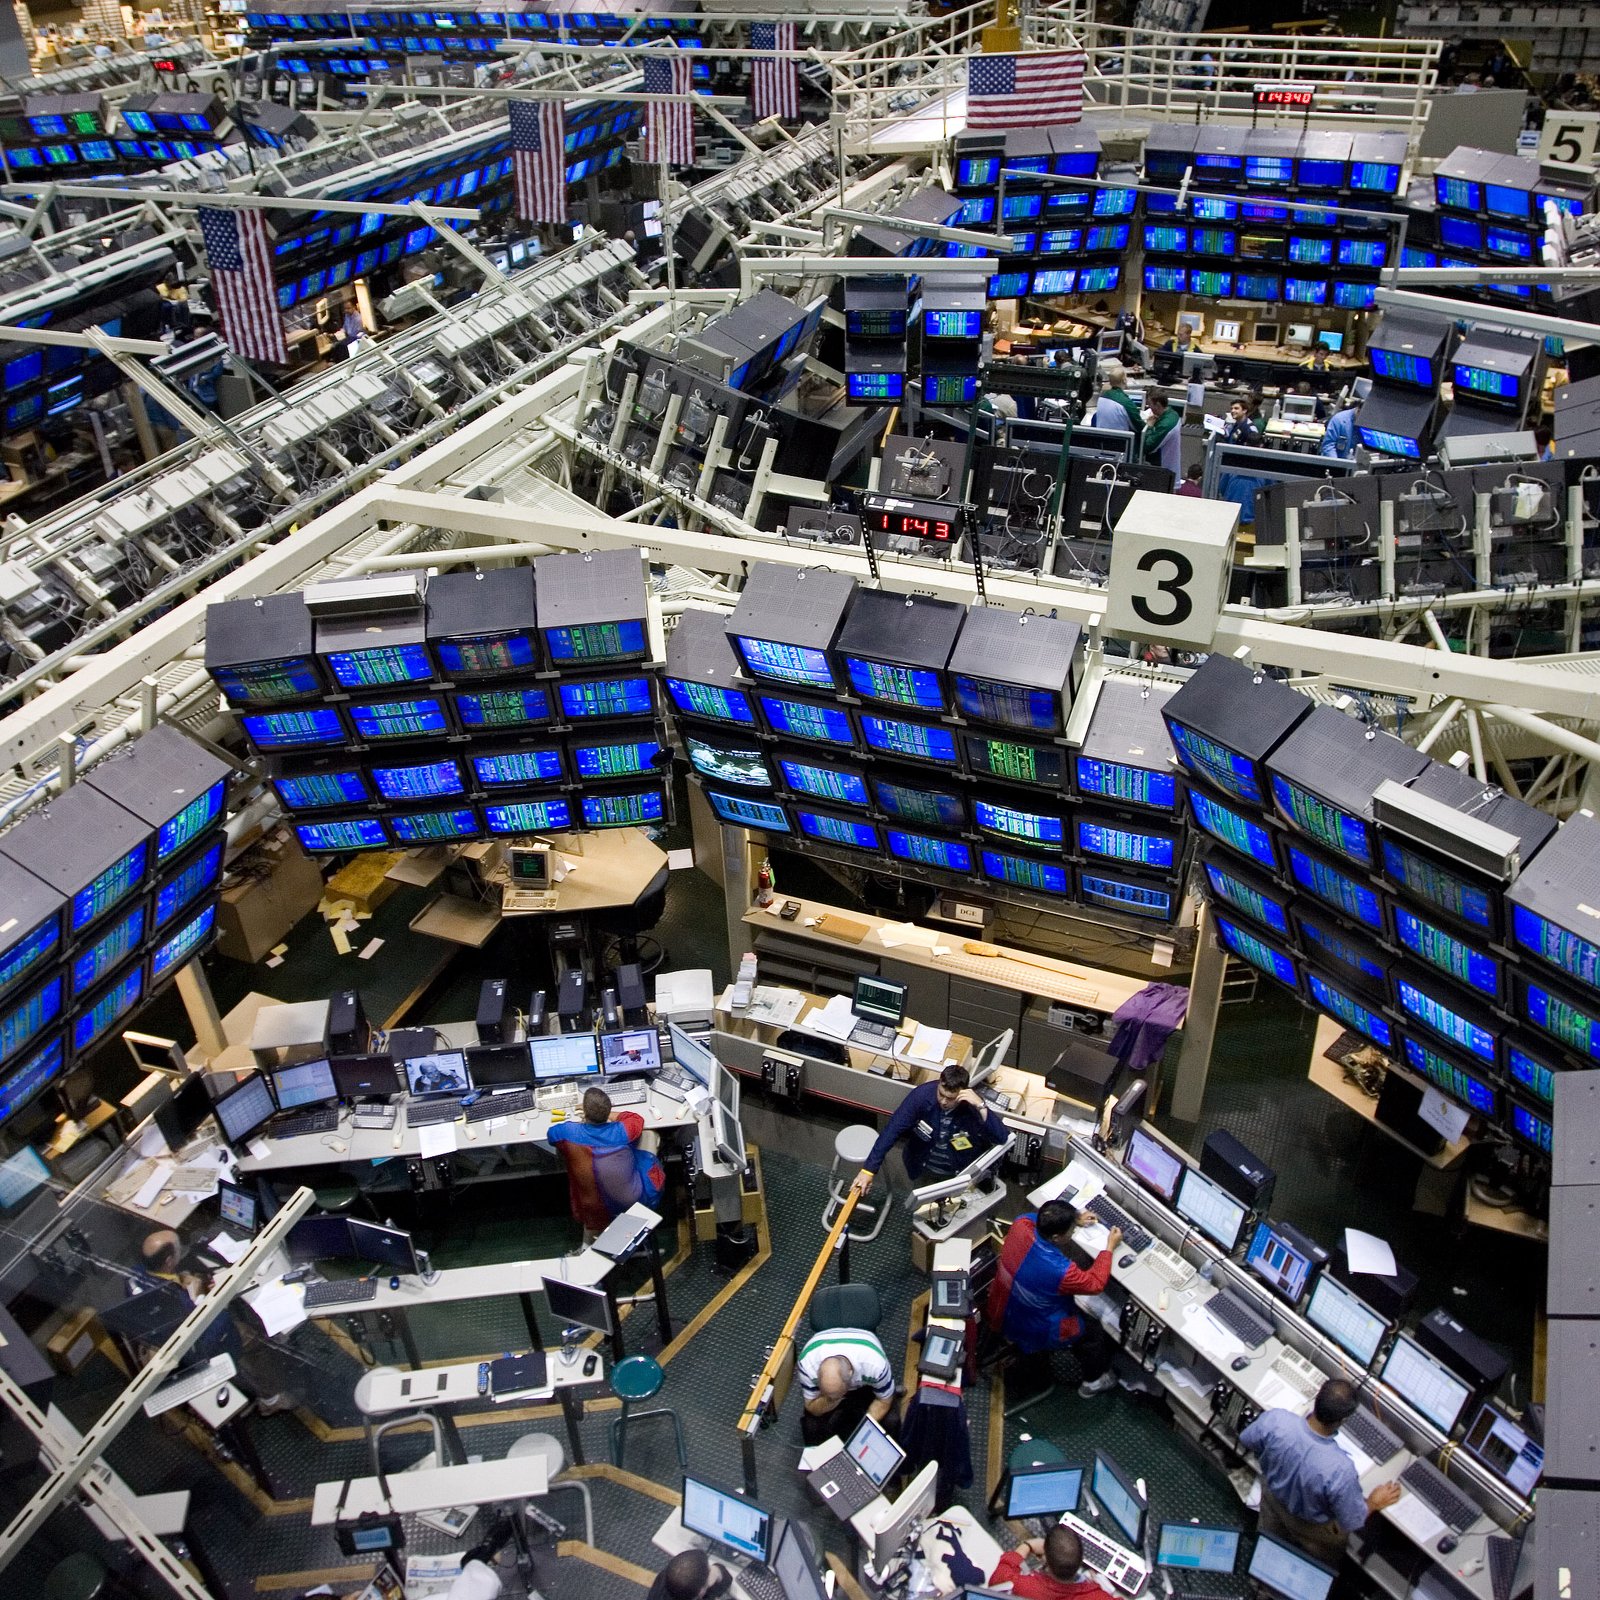 Cboe Beats CME to the Market, Will Launch Bitcoin Futures December 10